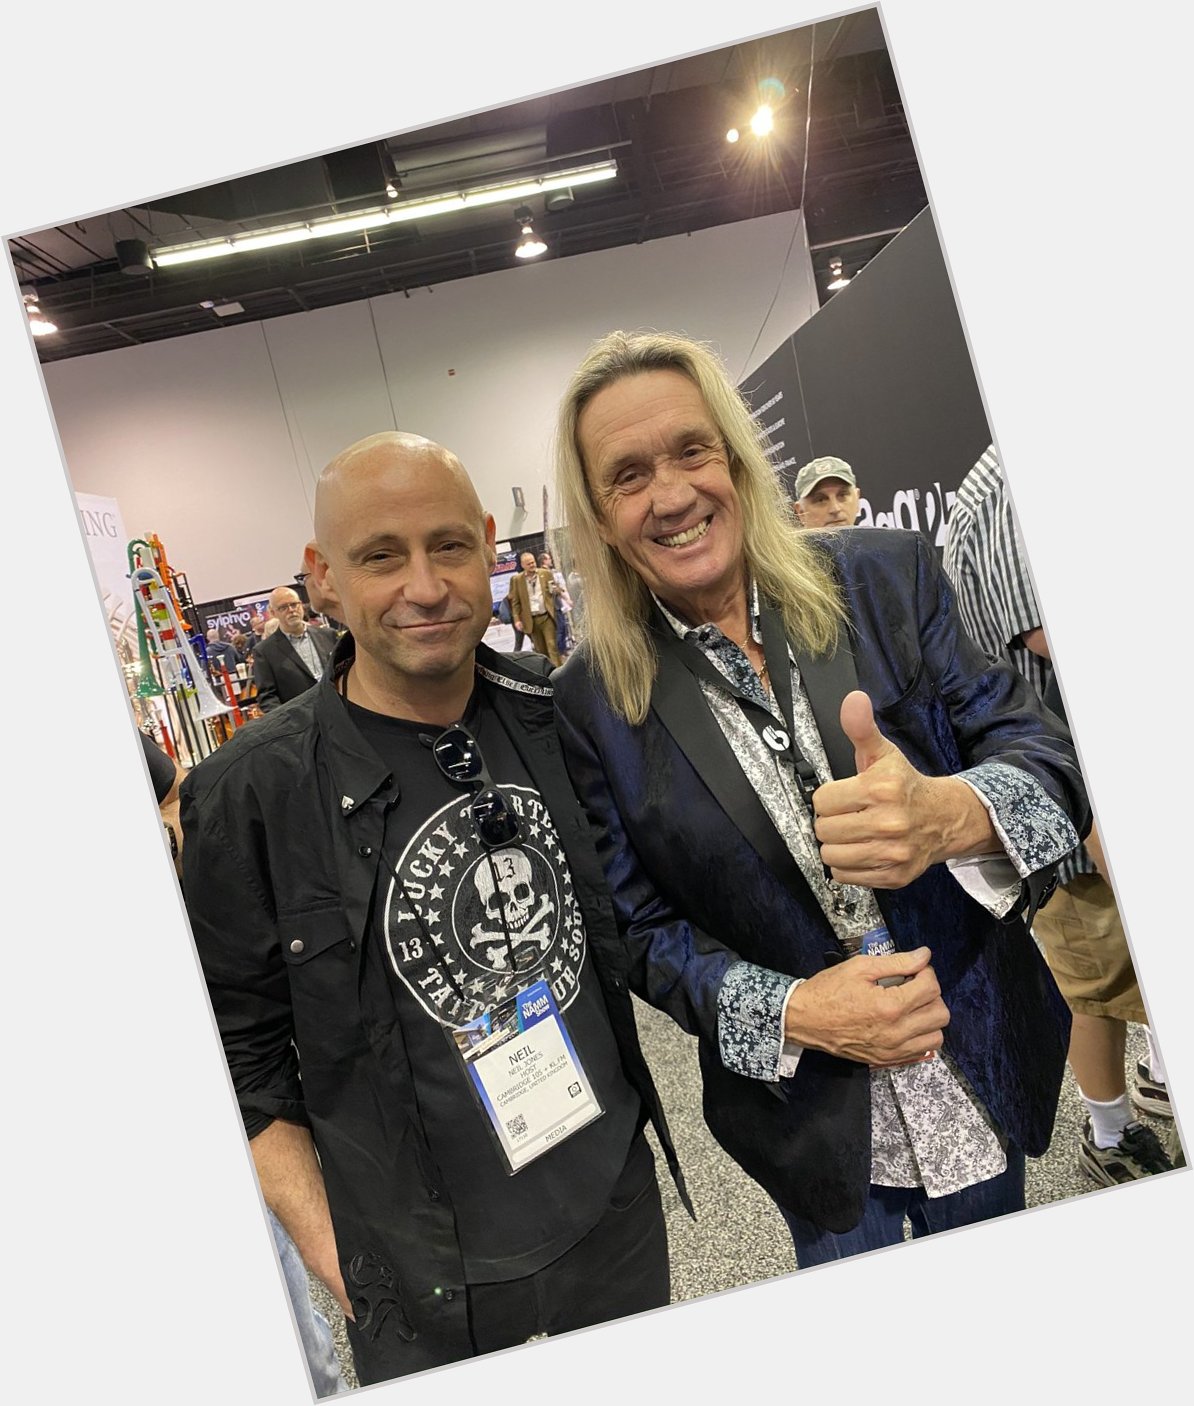 Happy Birthday to the one and only Nicko McBrain 